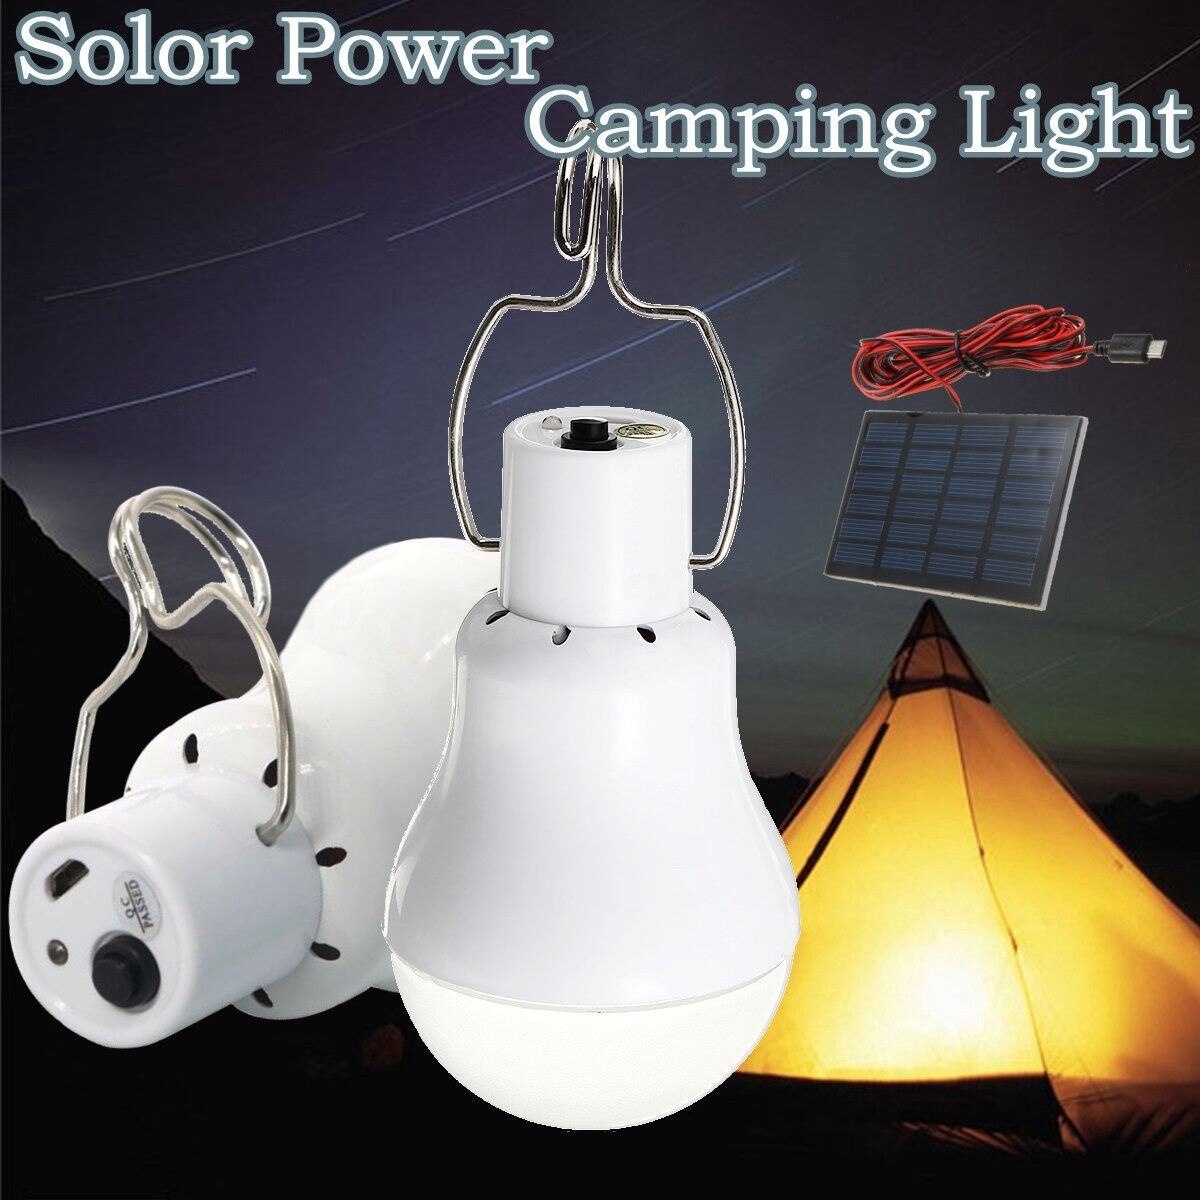 Draagbare Led Lamp Outdoor Indoor Zonne-energie LED Camping Verlichting Systeem Zonnepaneel